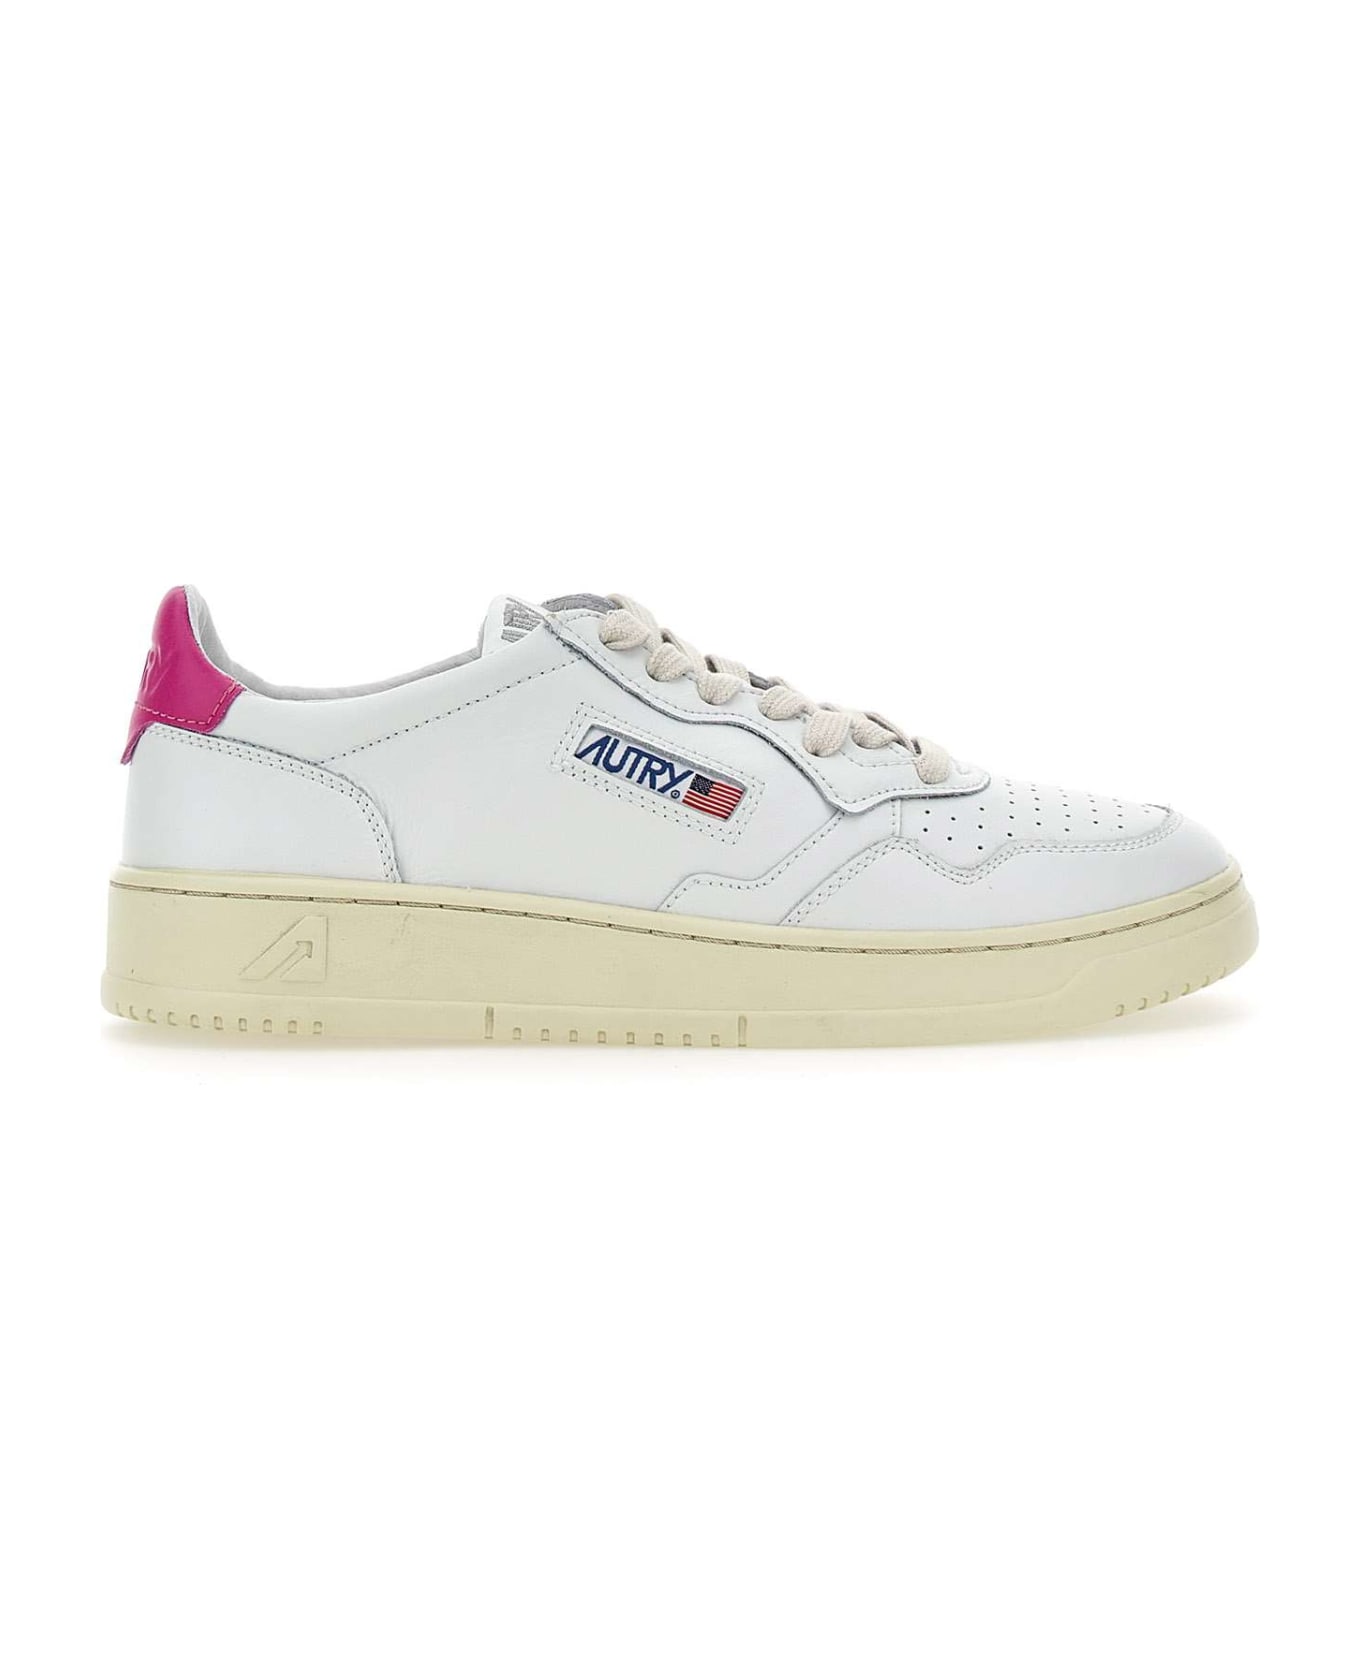 Autry 'll42' Leather Sneakers - WHITE/FUCHSIA スニーカー